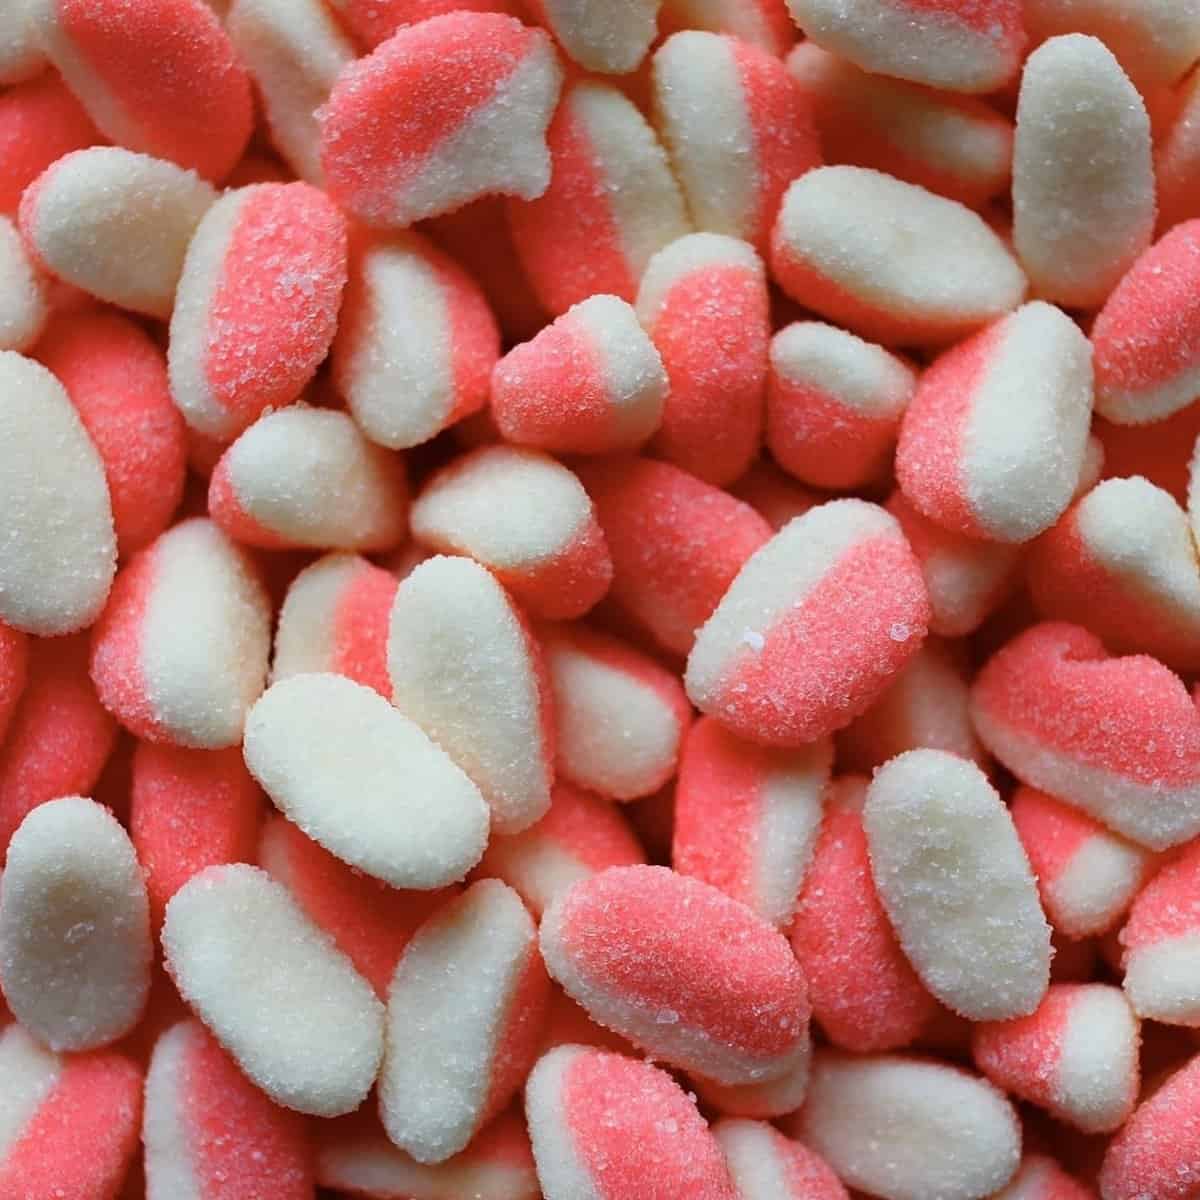 Pink Puffs Sweets 200g (Halal)